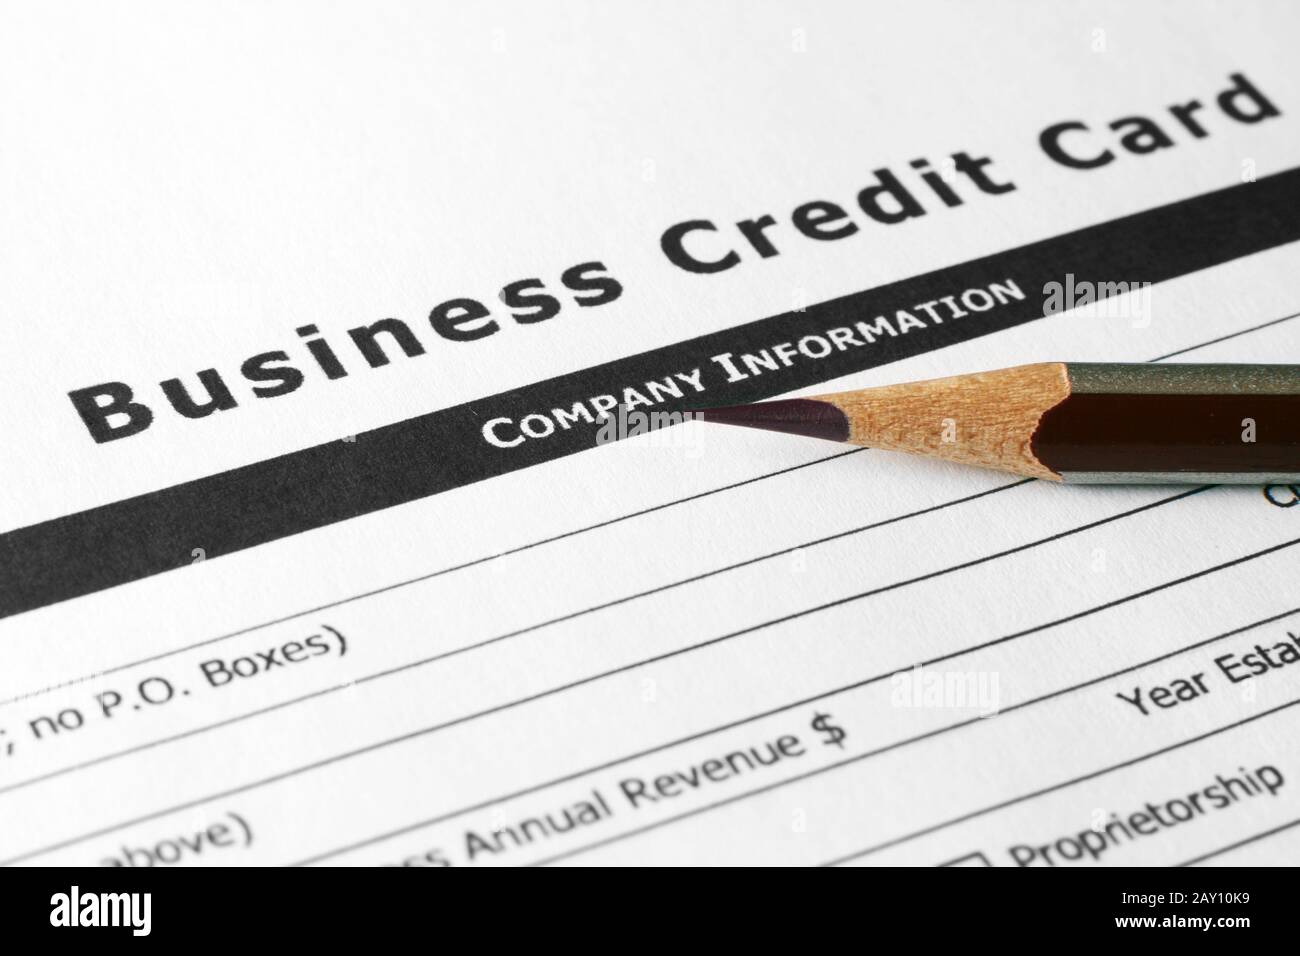 Business credit card Stock Photo